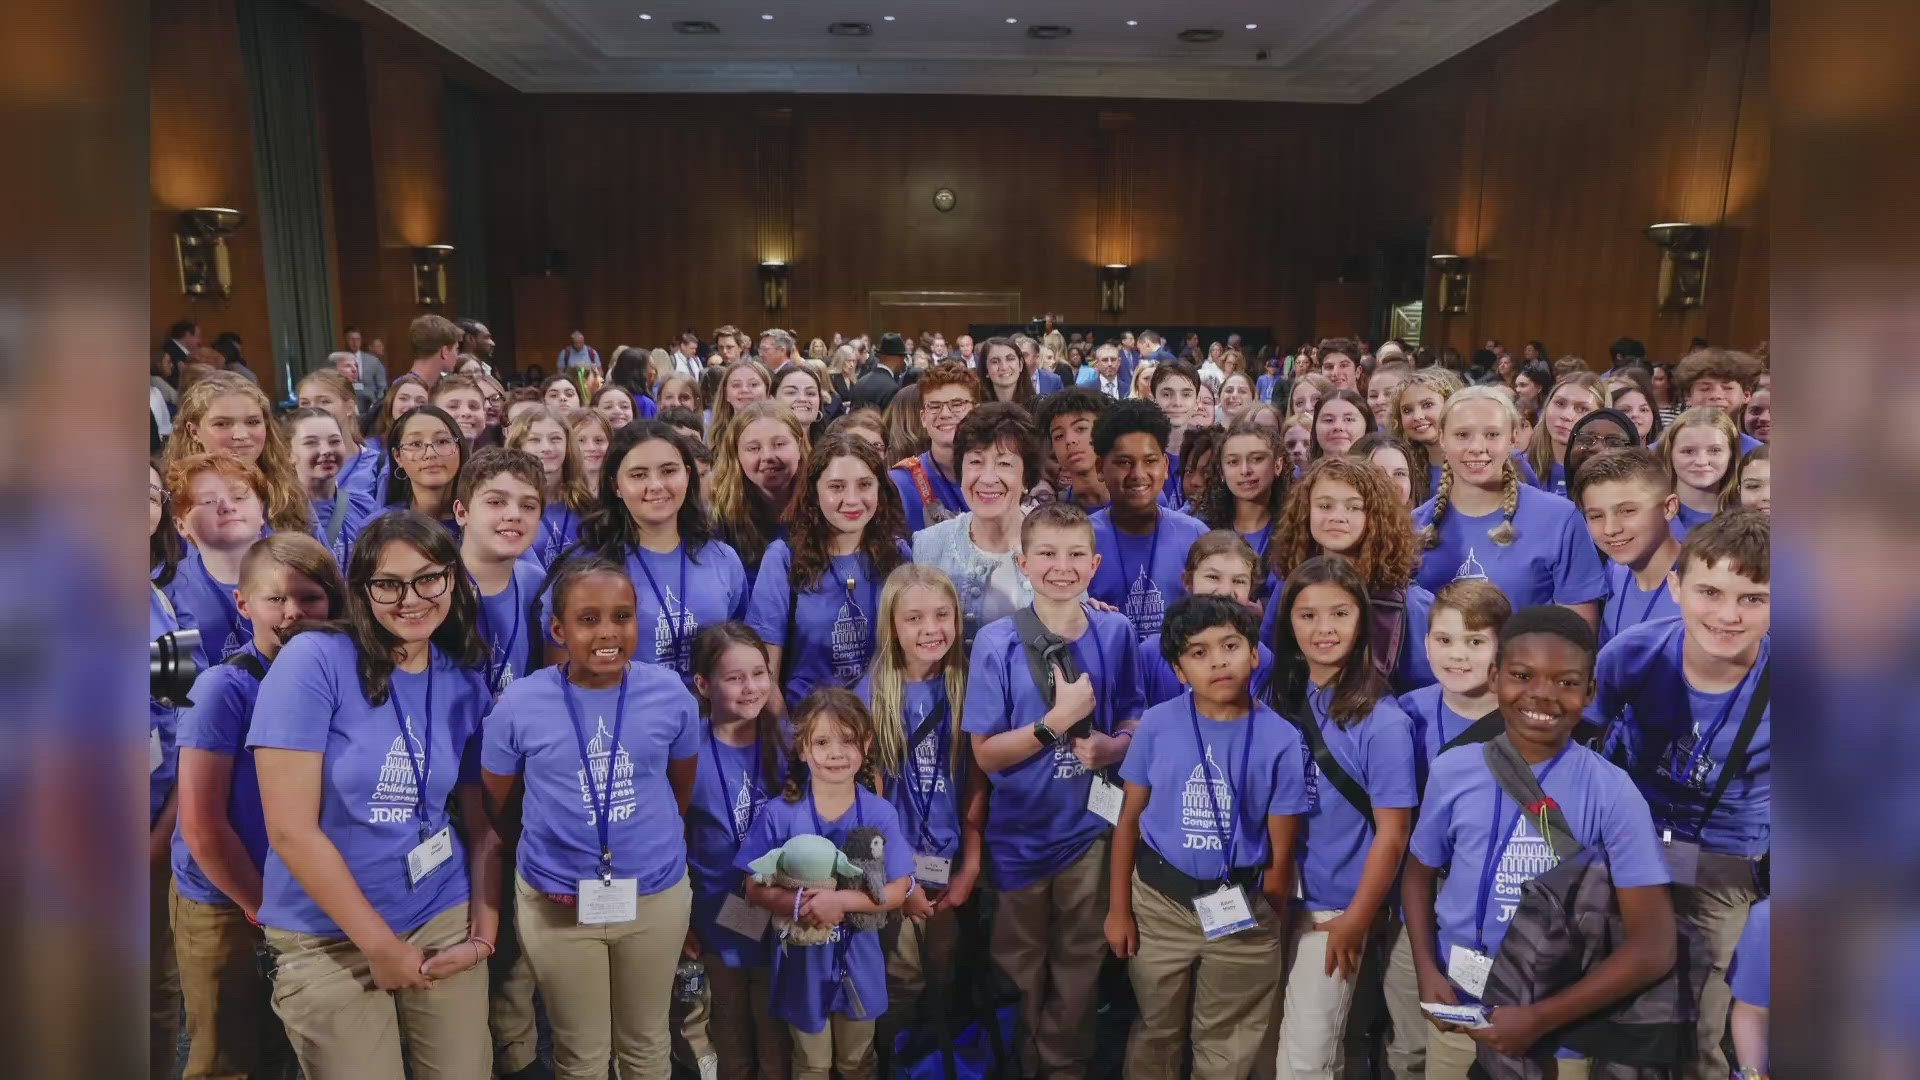 Every two years, JDRF, the leading global organization for Type 1 diabetes research funding sends 160 children to Washington D.C. to share their stories.